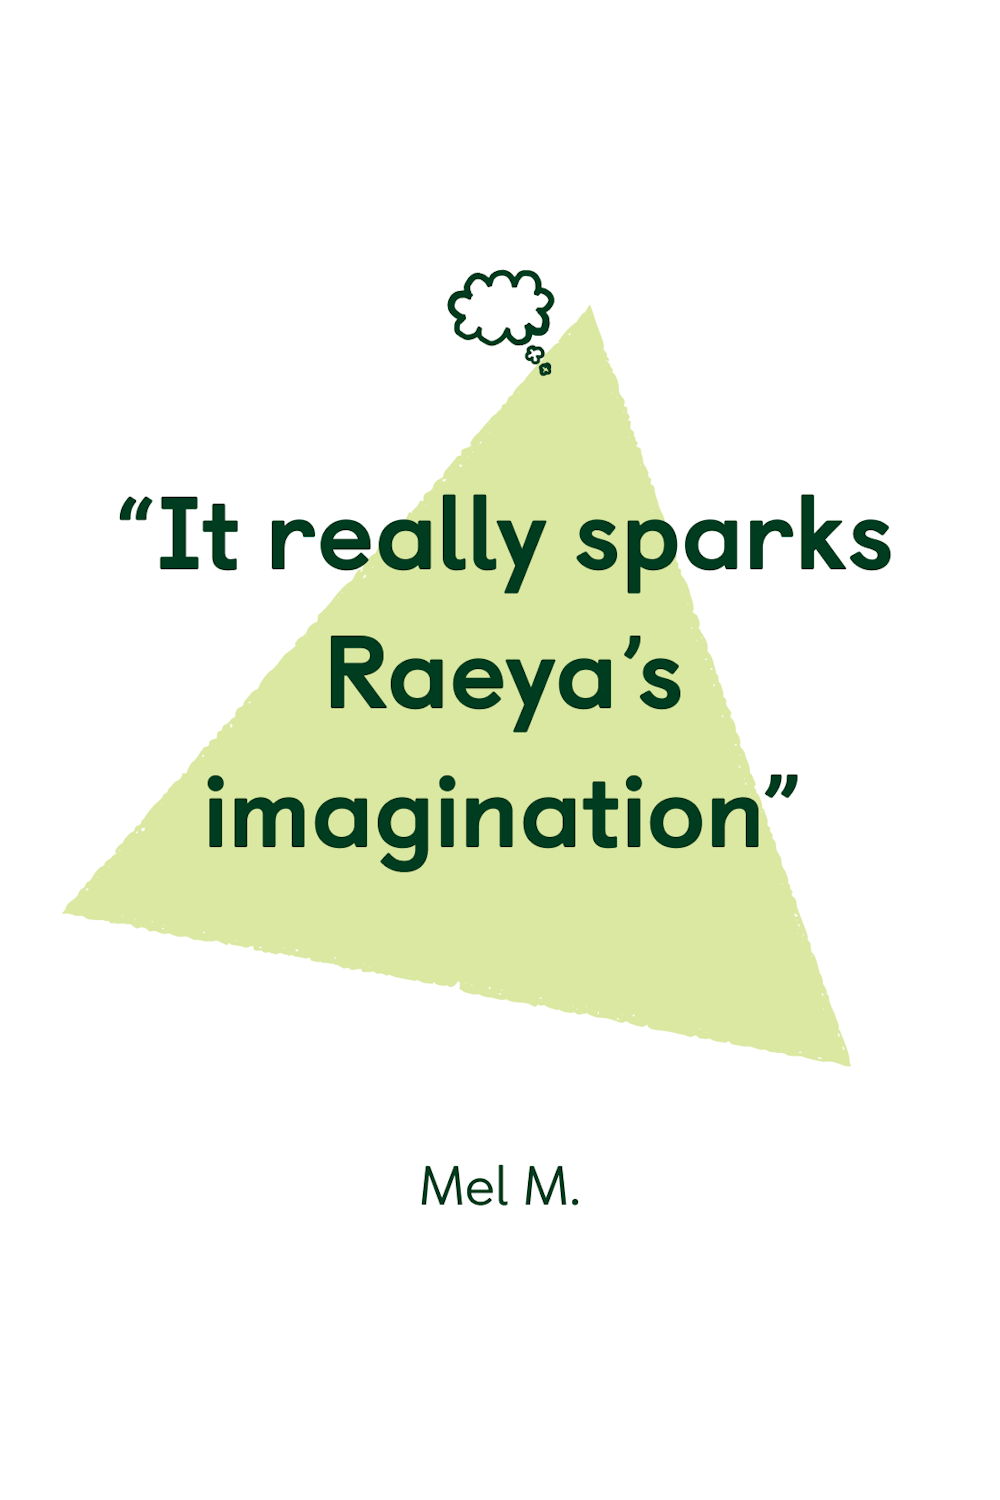 “It really sparks Raeya’s imagination”